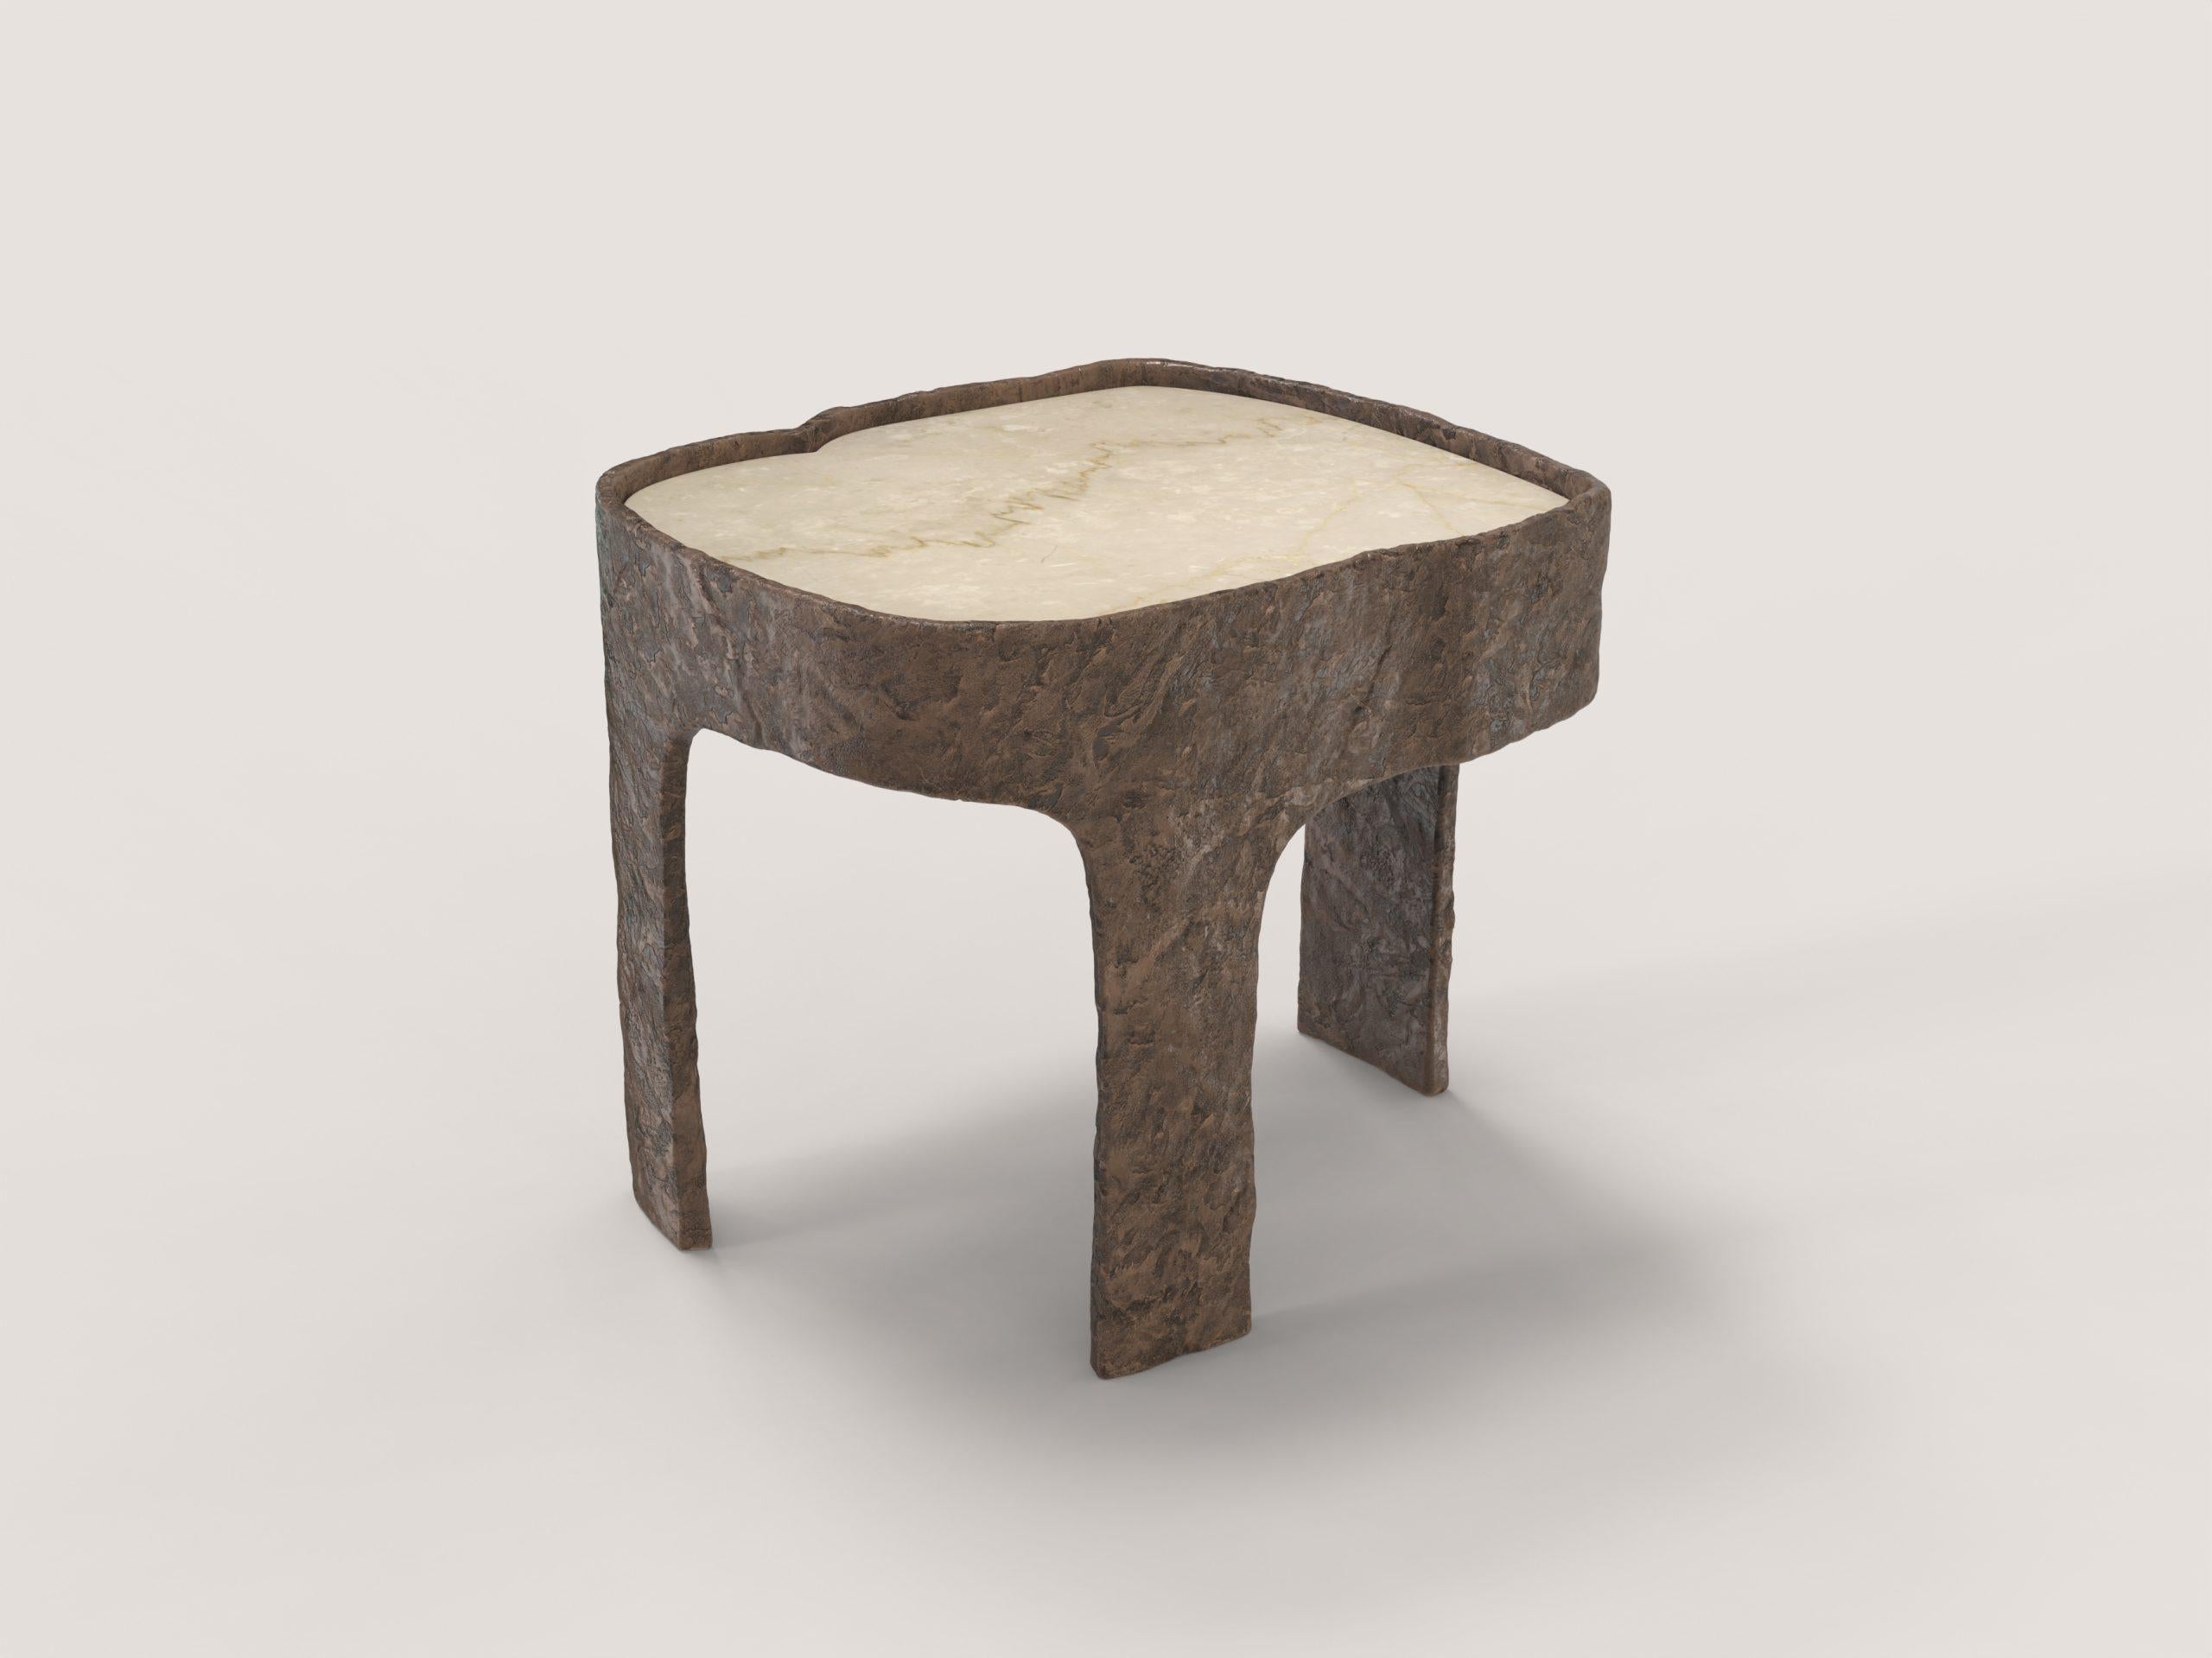 Sumatra Bronze V1 Side Table by Edizione Limitata
Limited Edition of 15 + 3 pieces. Signed and numbered.
Dimensions: D 38 x W 44 x H 37 cm.
Materials: Cast bronze and botticino marble.

Sumatra is a 21st Century collection of tables made by